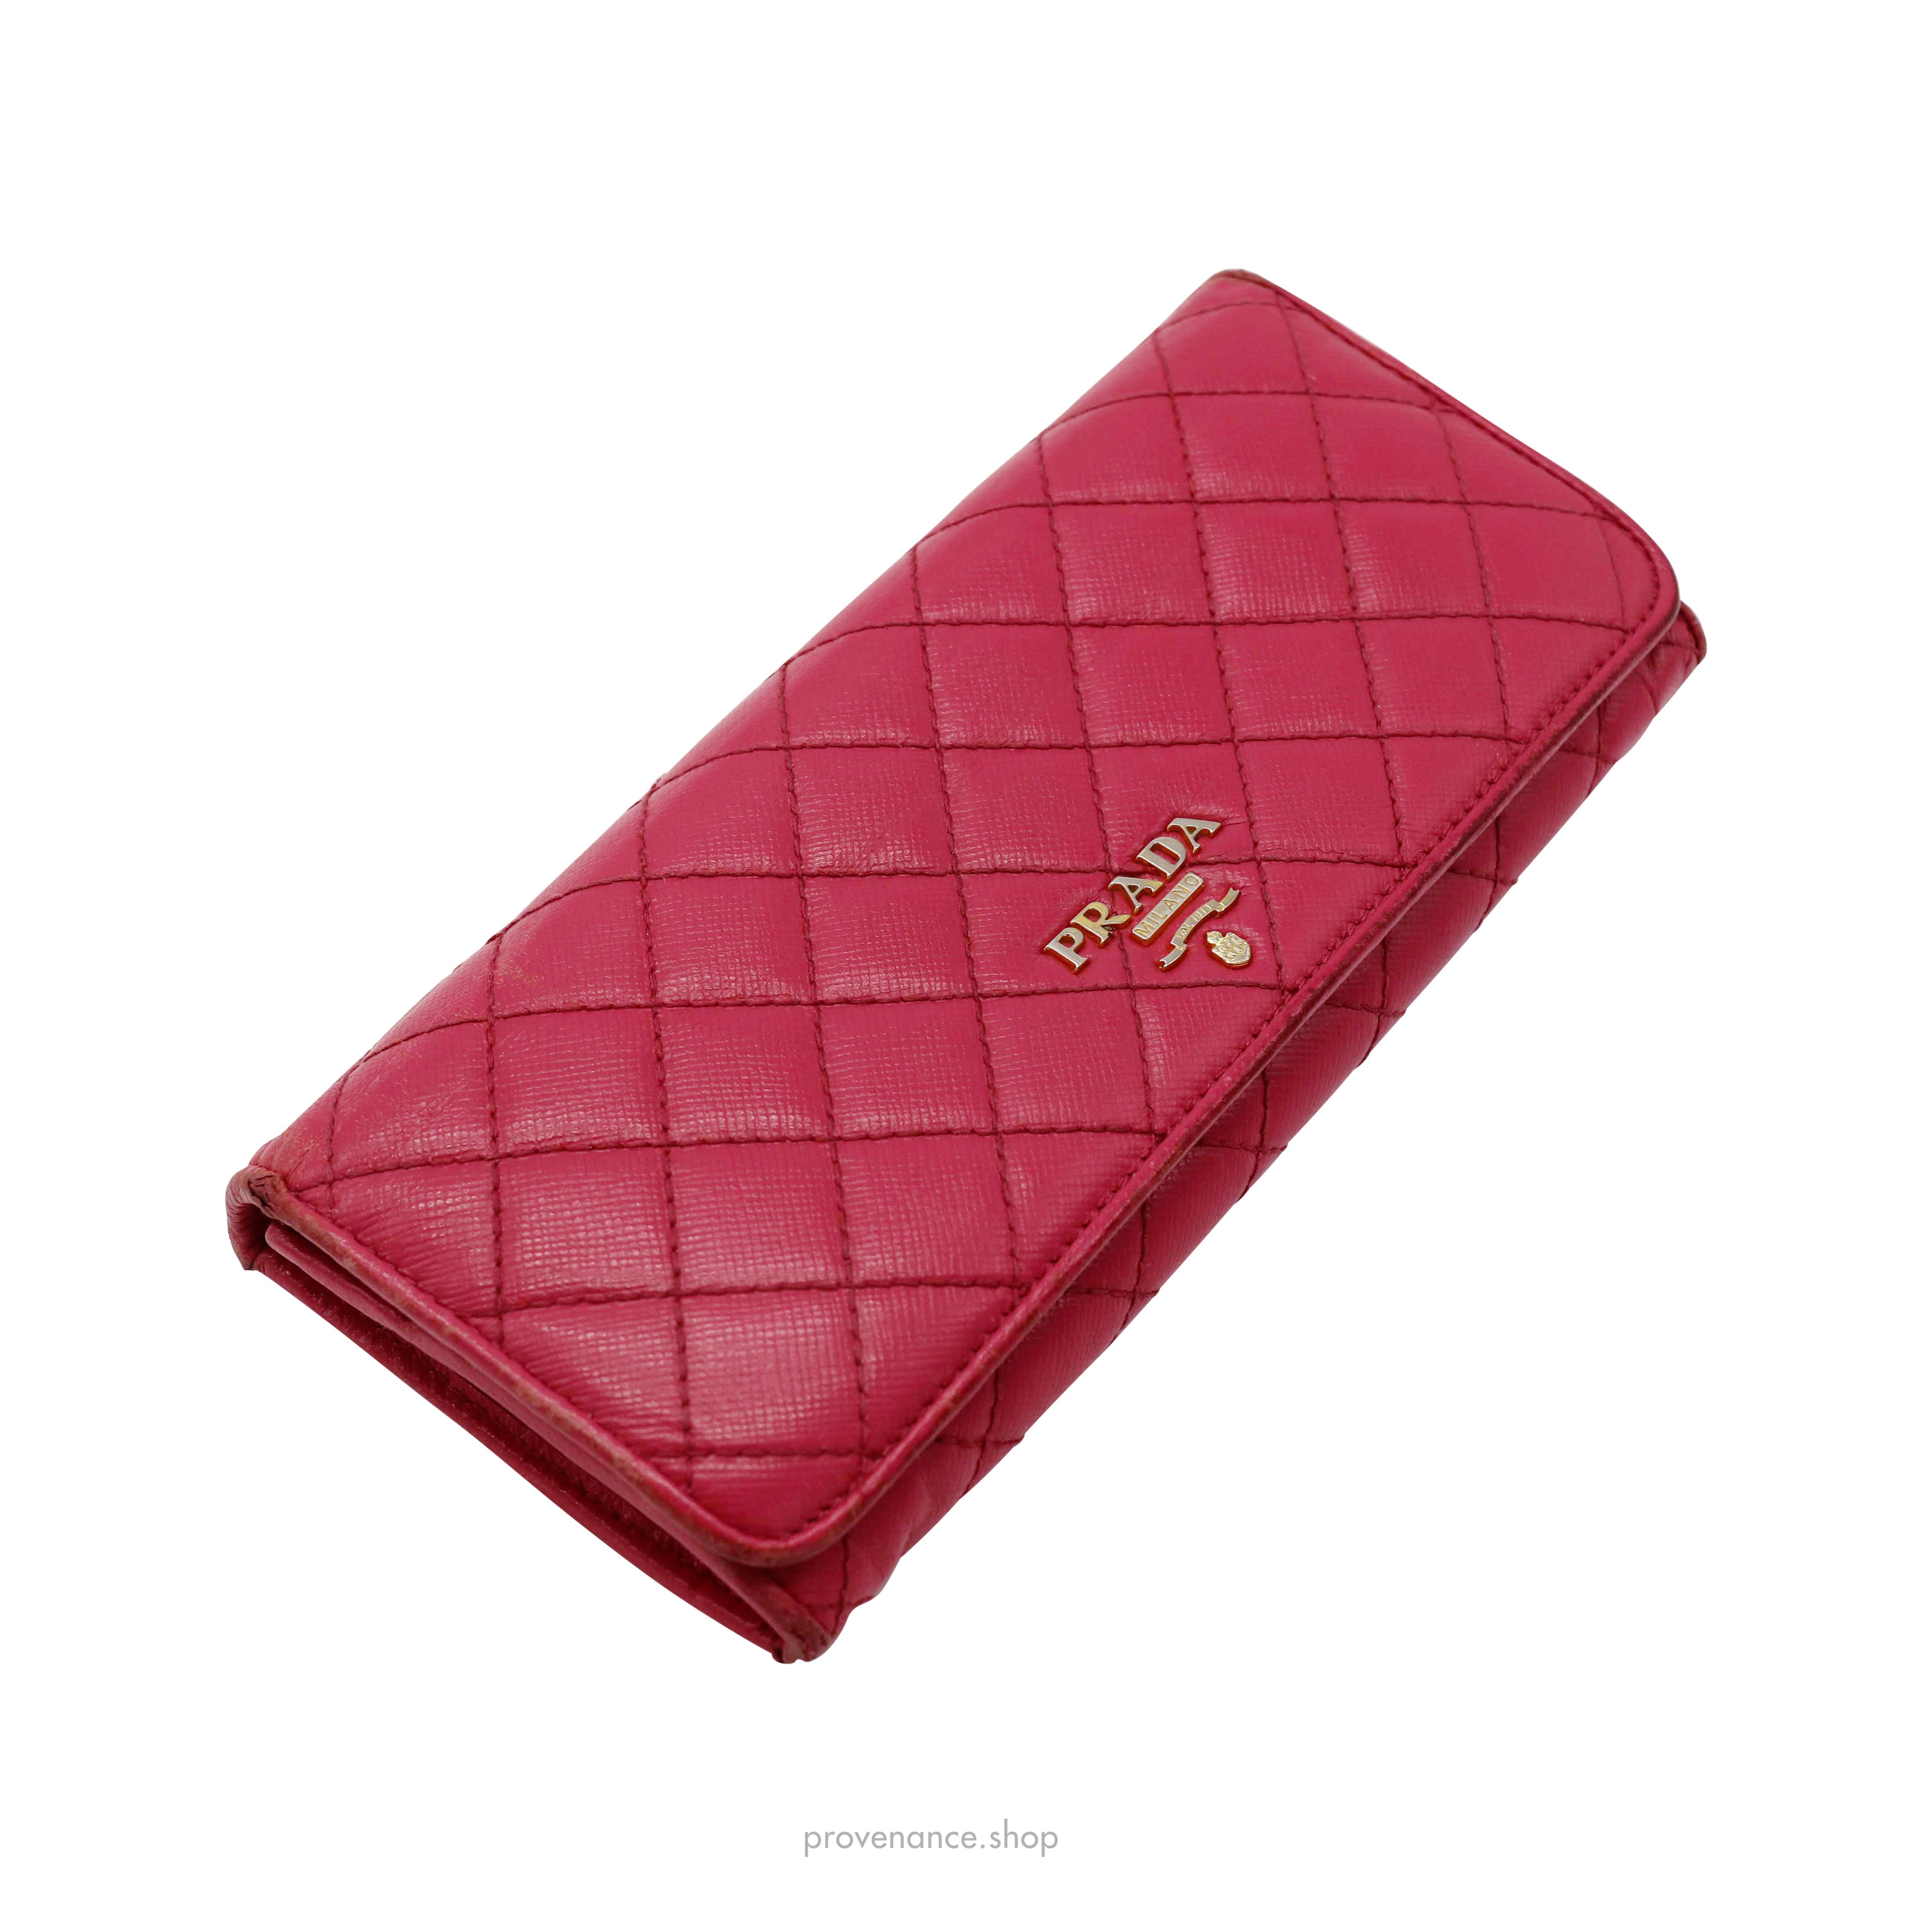 Prada Long Wallet - Pink Quilted Saffiano Leather - 3